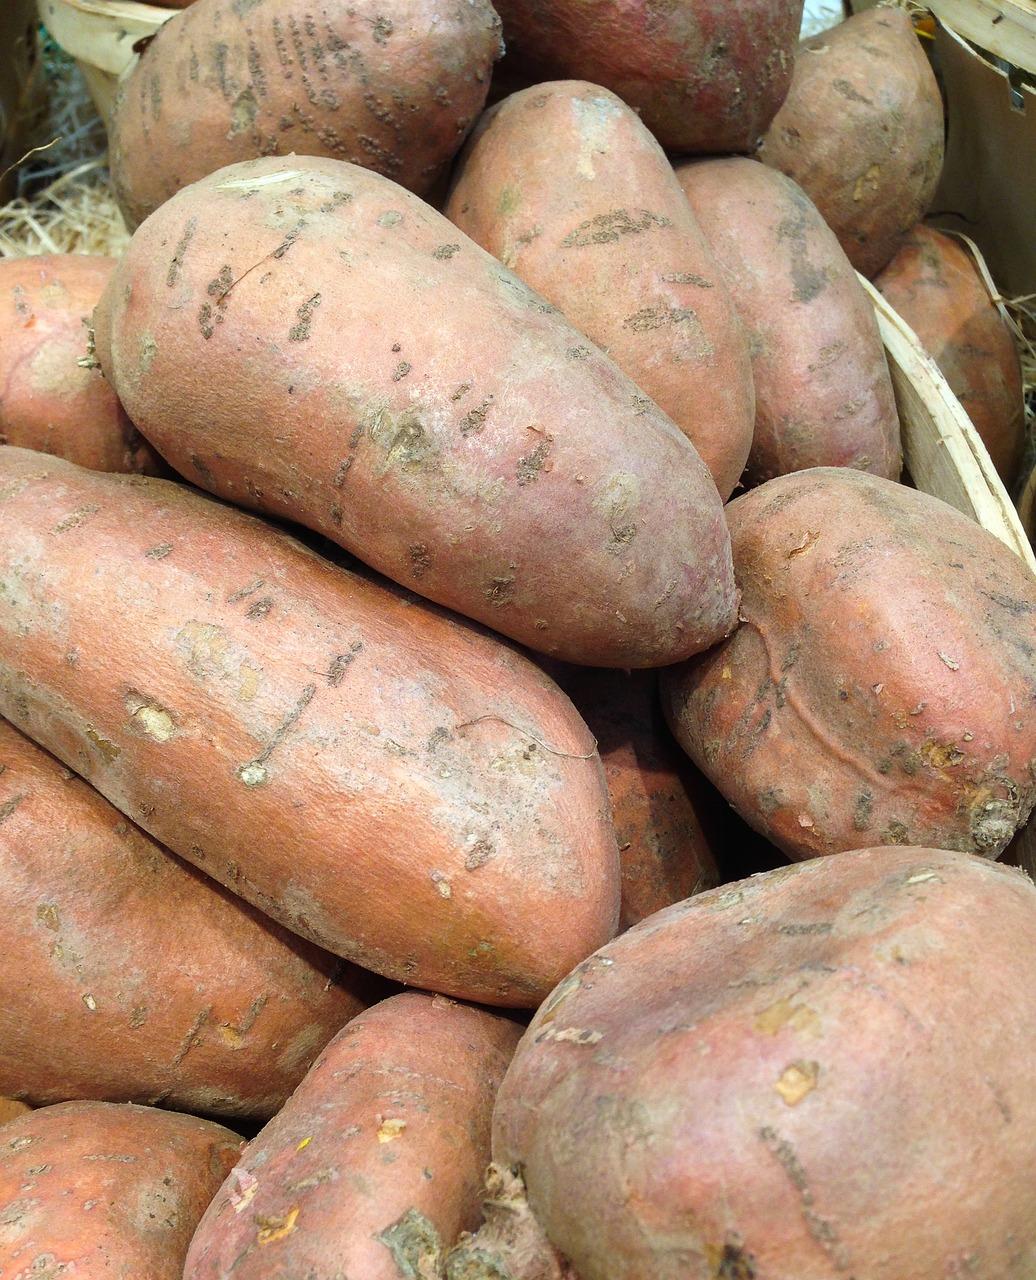  When To Plant Sweet Potatoes In Zone 8 